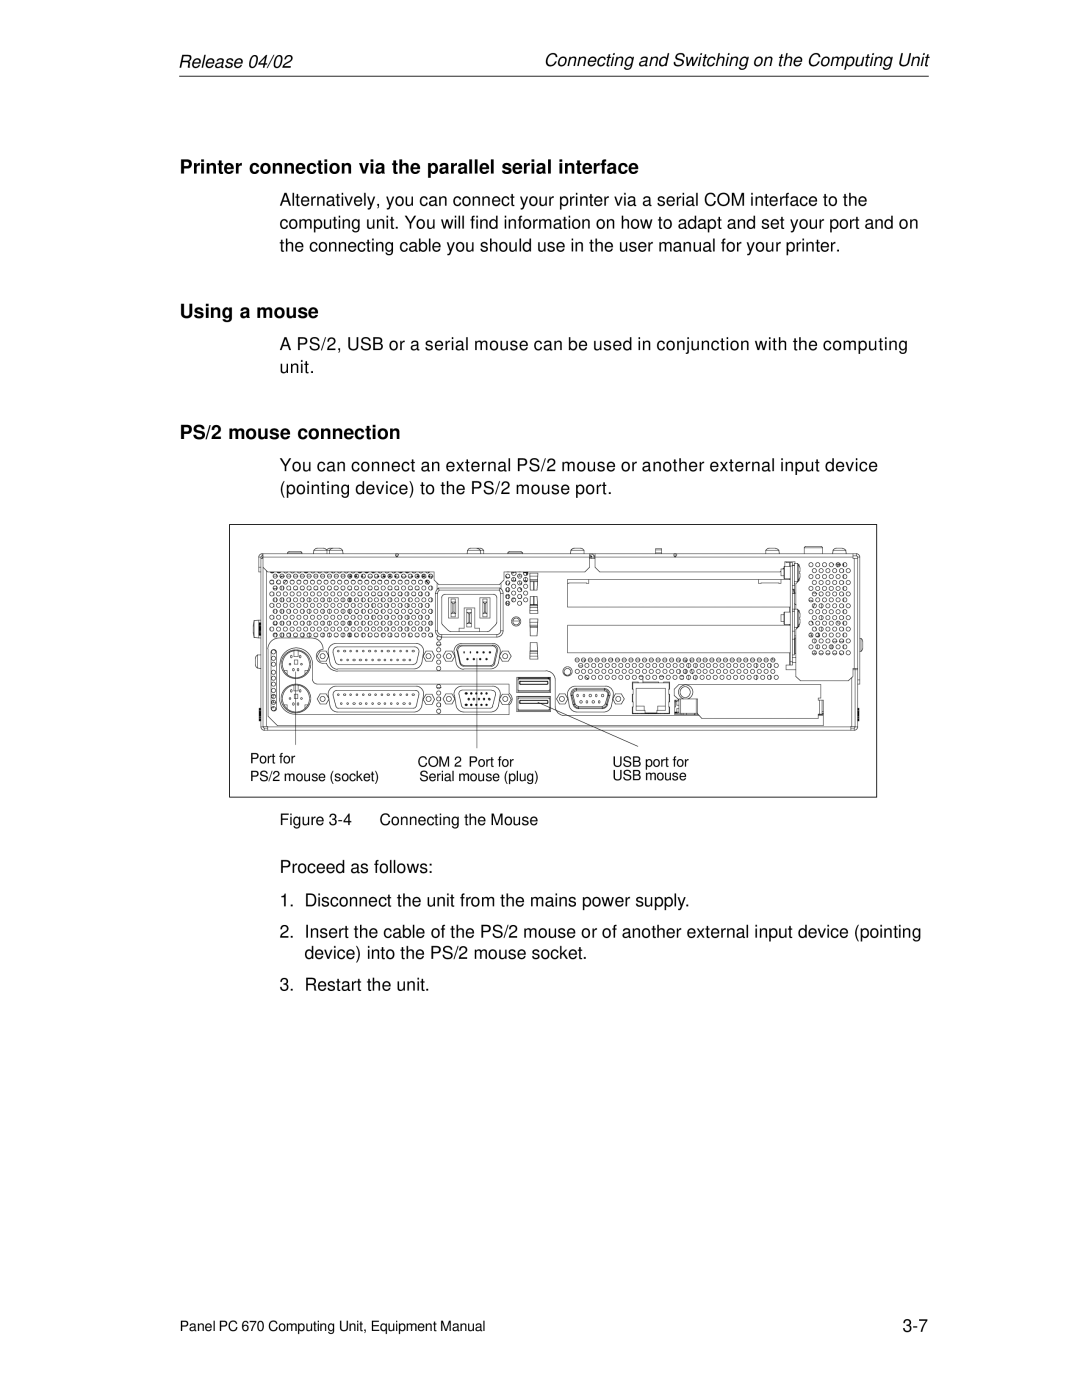 Siemens PC 670 manual PS/2 mouse connection, Connecting the Mouse 